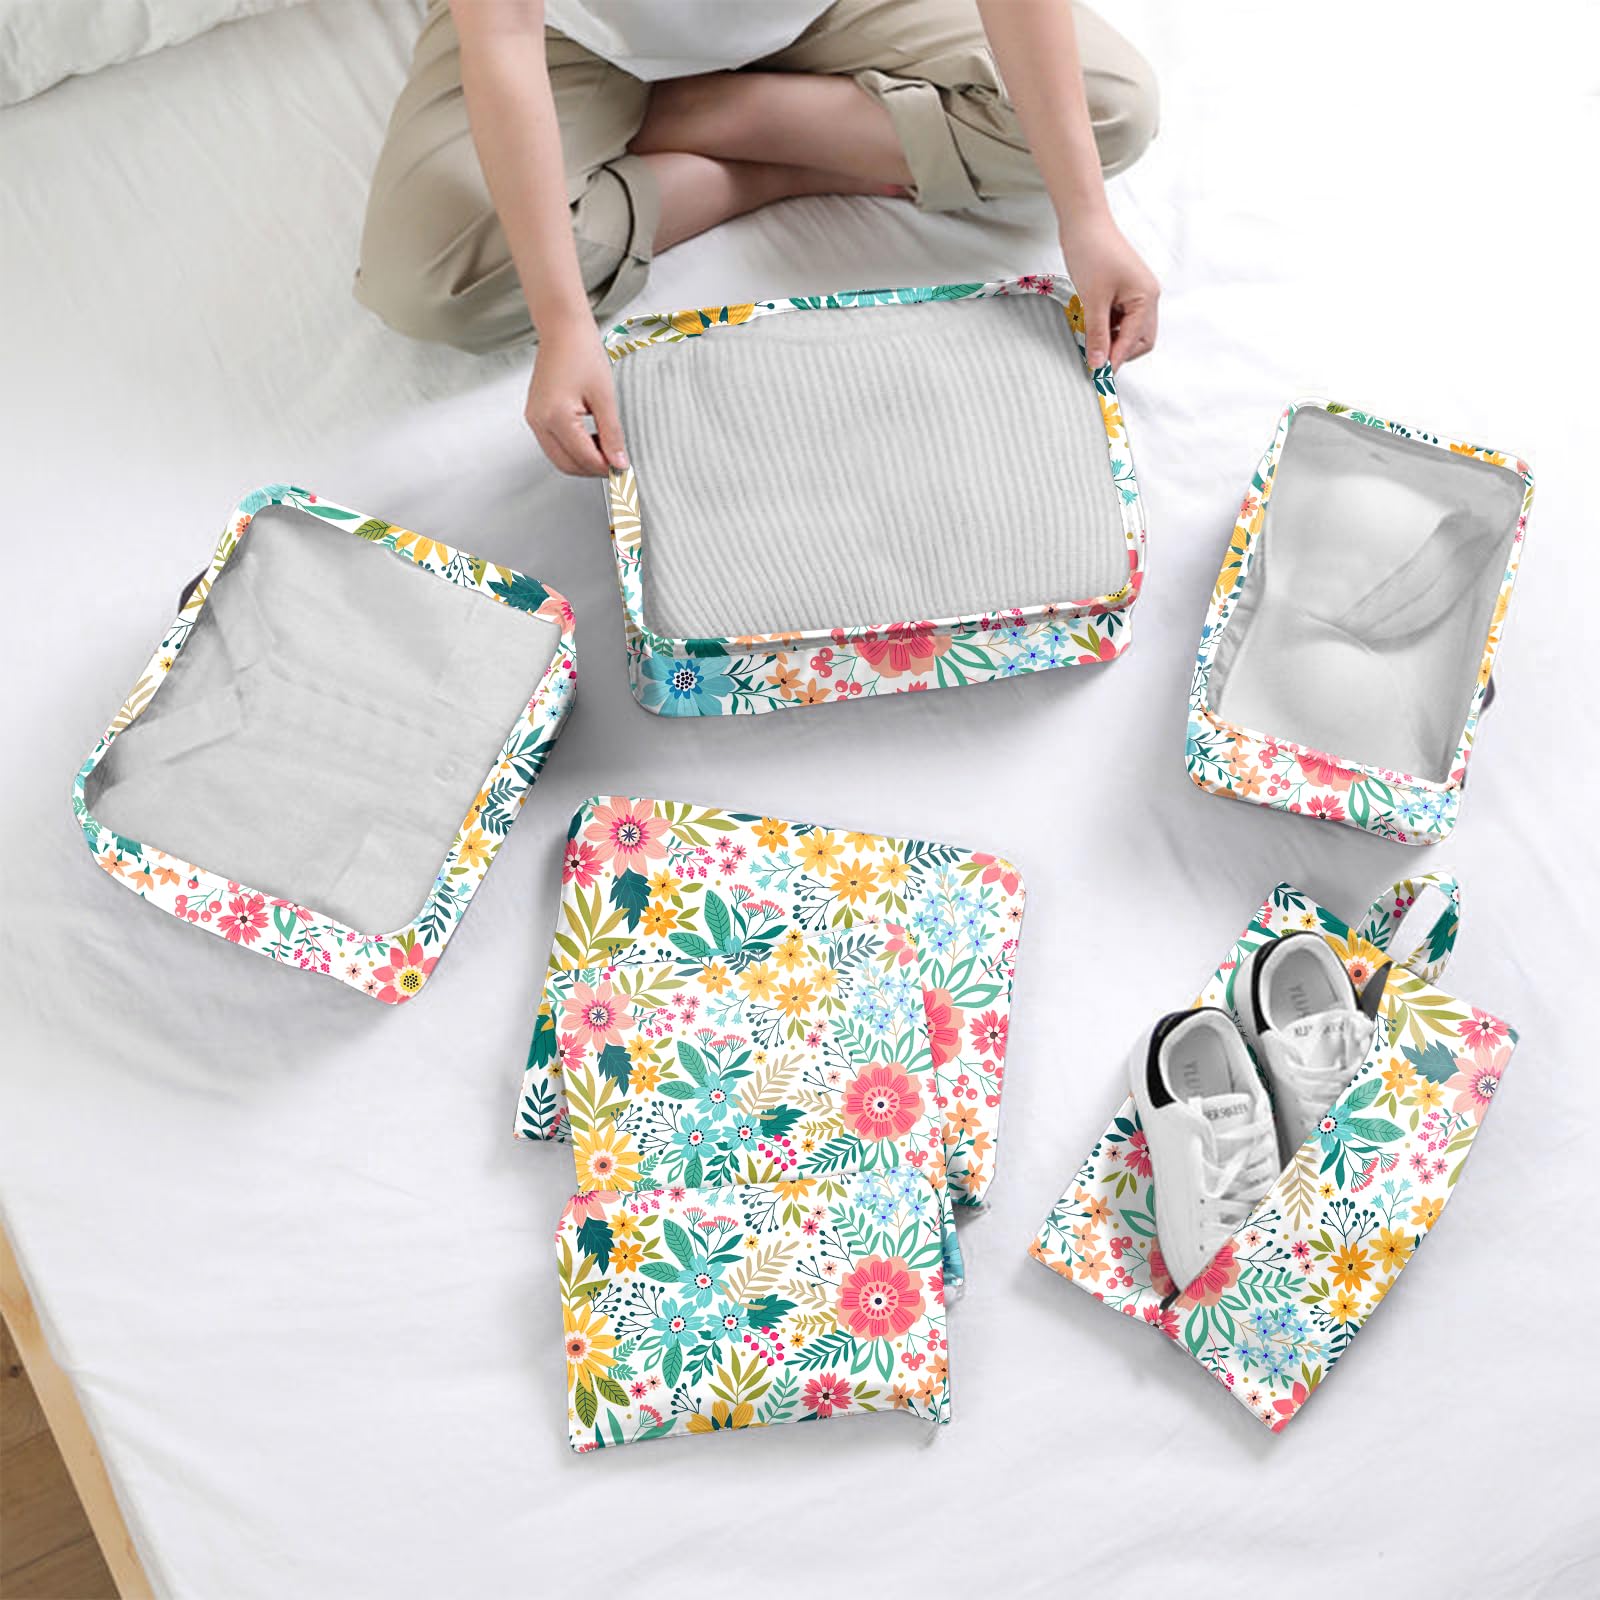 7-Piece Floral Travel Packing Cubes Product Details